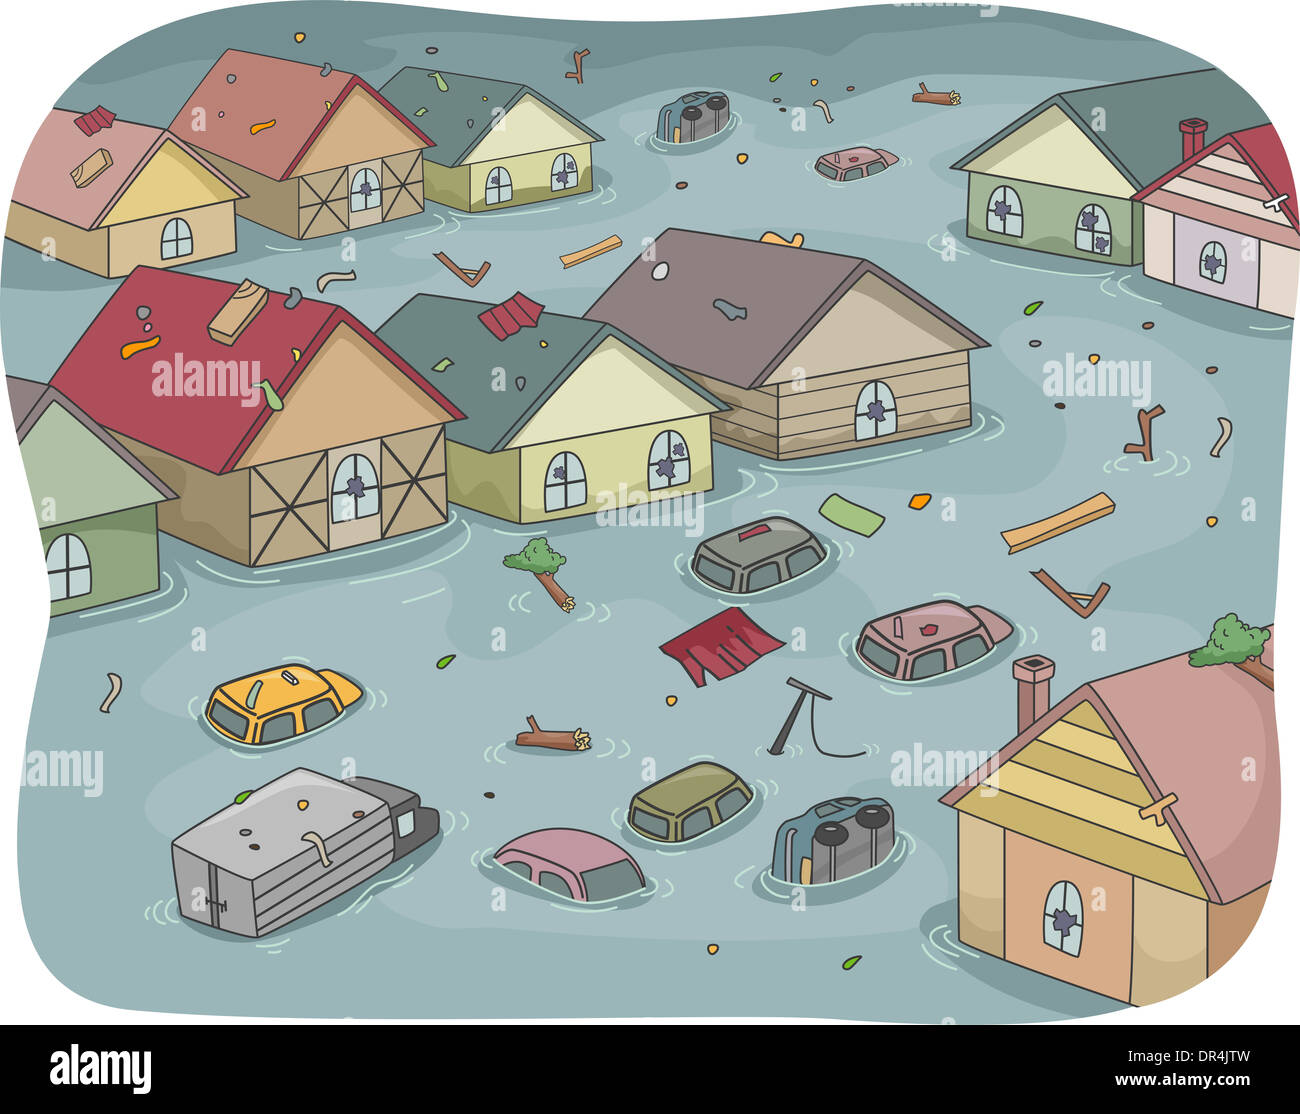 Illustration of a Flooded City with Partially Submerged Houses and Vehicles Stock Photo